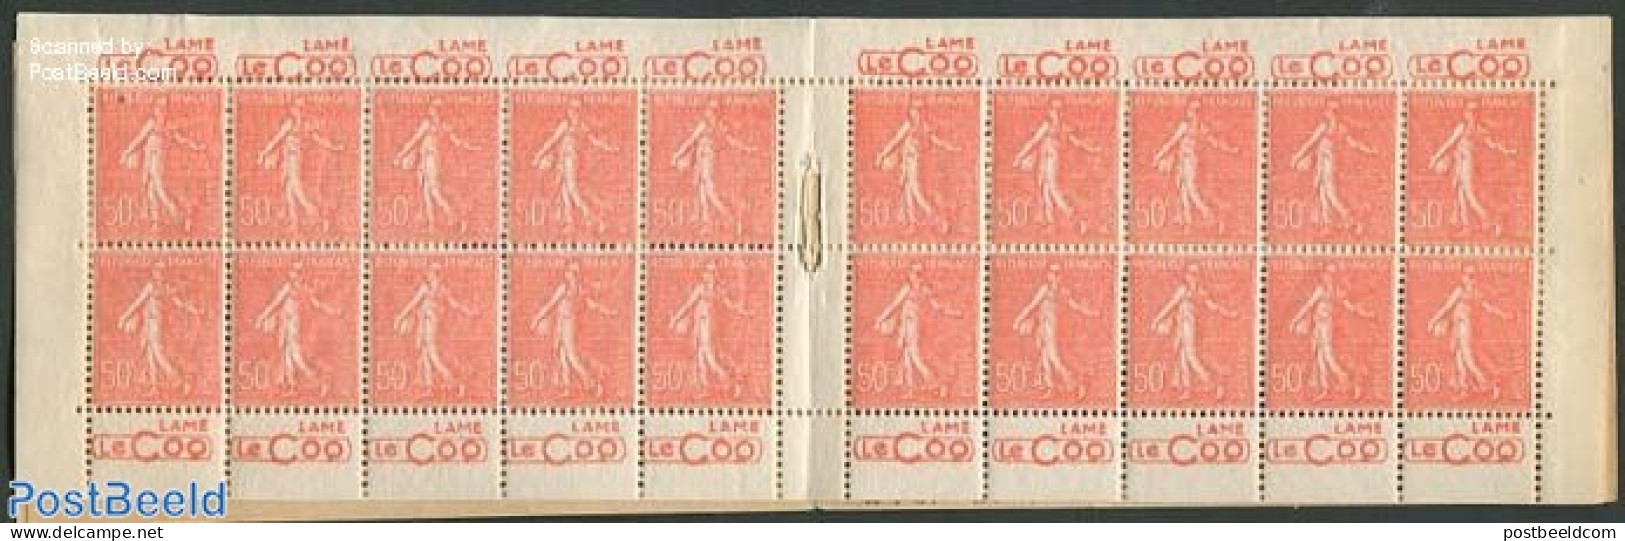 France 1924 20x50c Booklet (Lame Le Coq 4x), Mint NH, Stamp Booklets - Nuevos